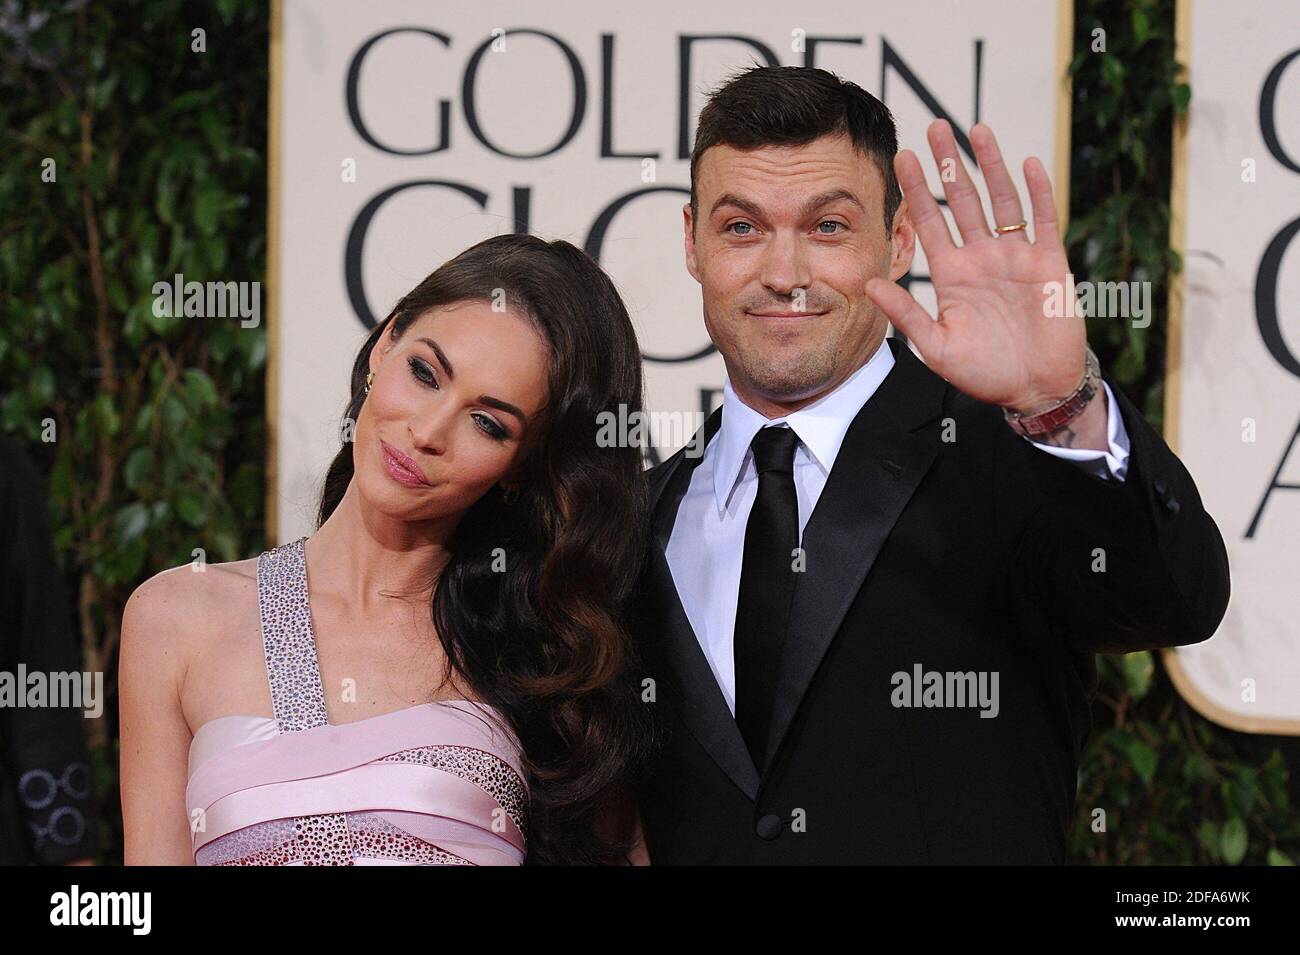 File photo dated January 16, 2011 of Megan Fox and Brian Austin Green arriving for the 68th Annual Golden Globe Awards ceremony, held at the Beverly Hilton Hotel in Los Angeles, CA, USA. After nearly 10 years of marriage and three children together, Megan Fox and Brian Austin Green have split. The 'Beverly Hills, 90210' star confirmed the news on his podcast “…With Brian Austin Green,' in an episode titled “Context.” Photo by Lionel Hahn/ABACAUSA.COM Stock Photo